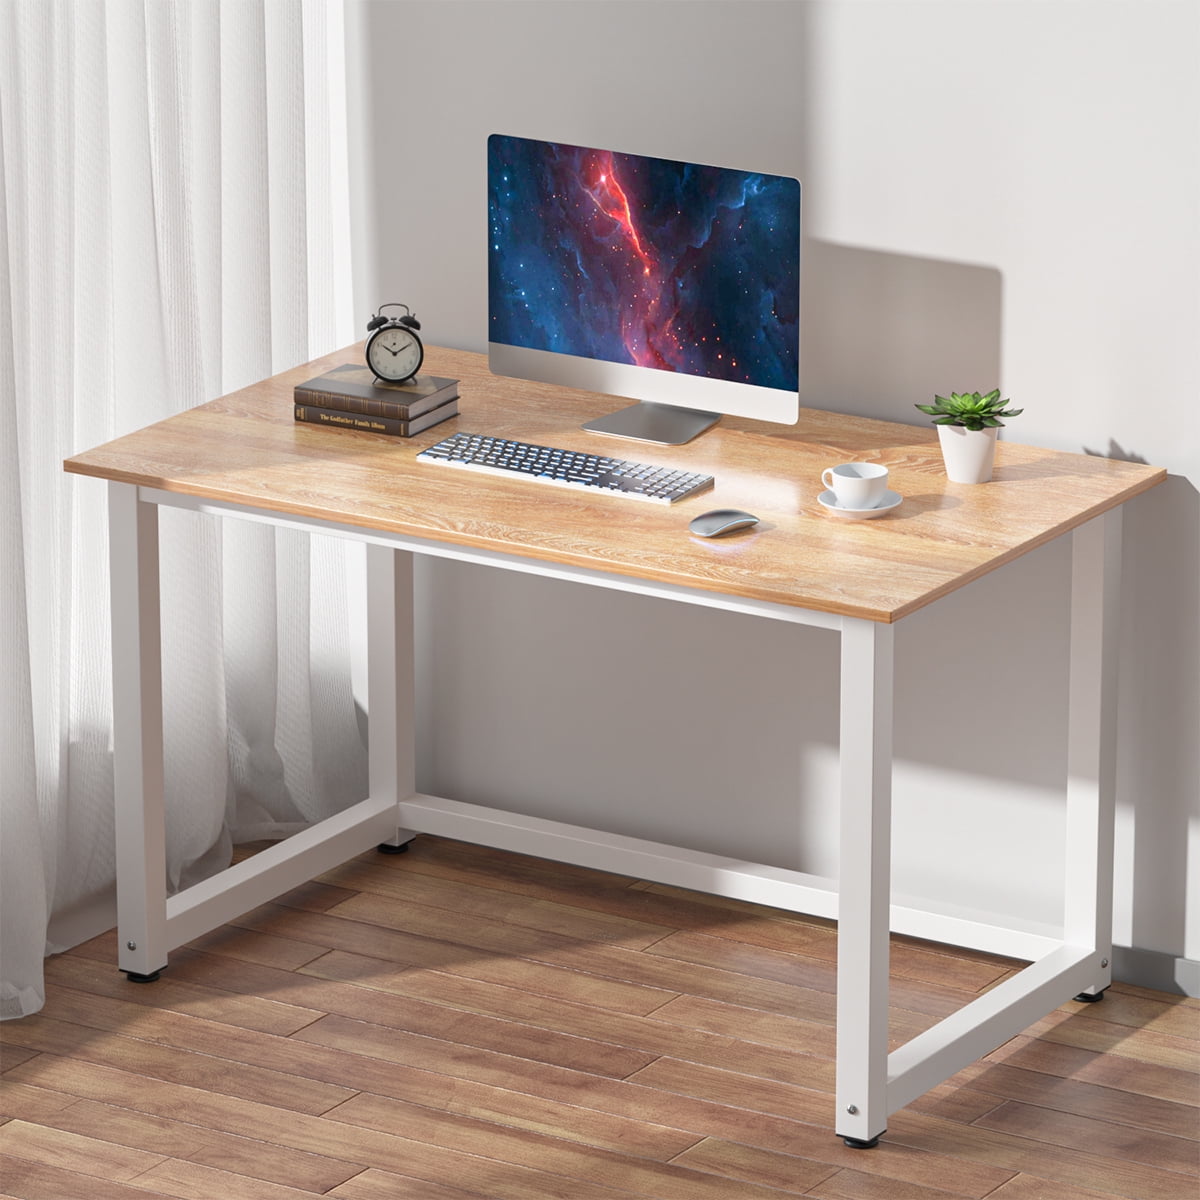 School Small Desk Computer Laptop PC Table Home Office Dorm Study Wood Furniture 